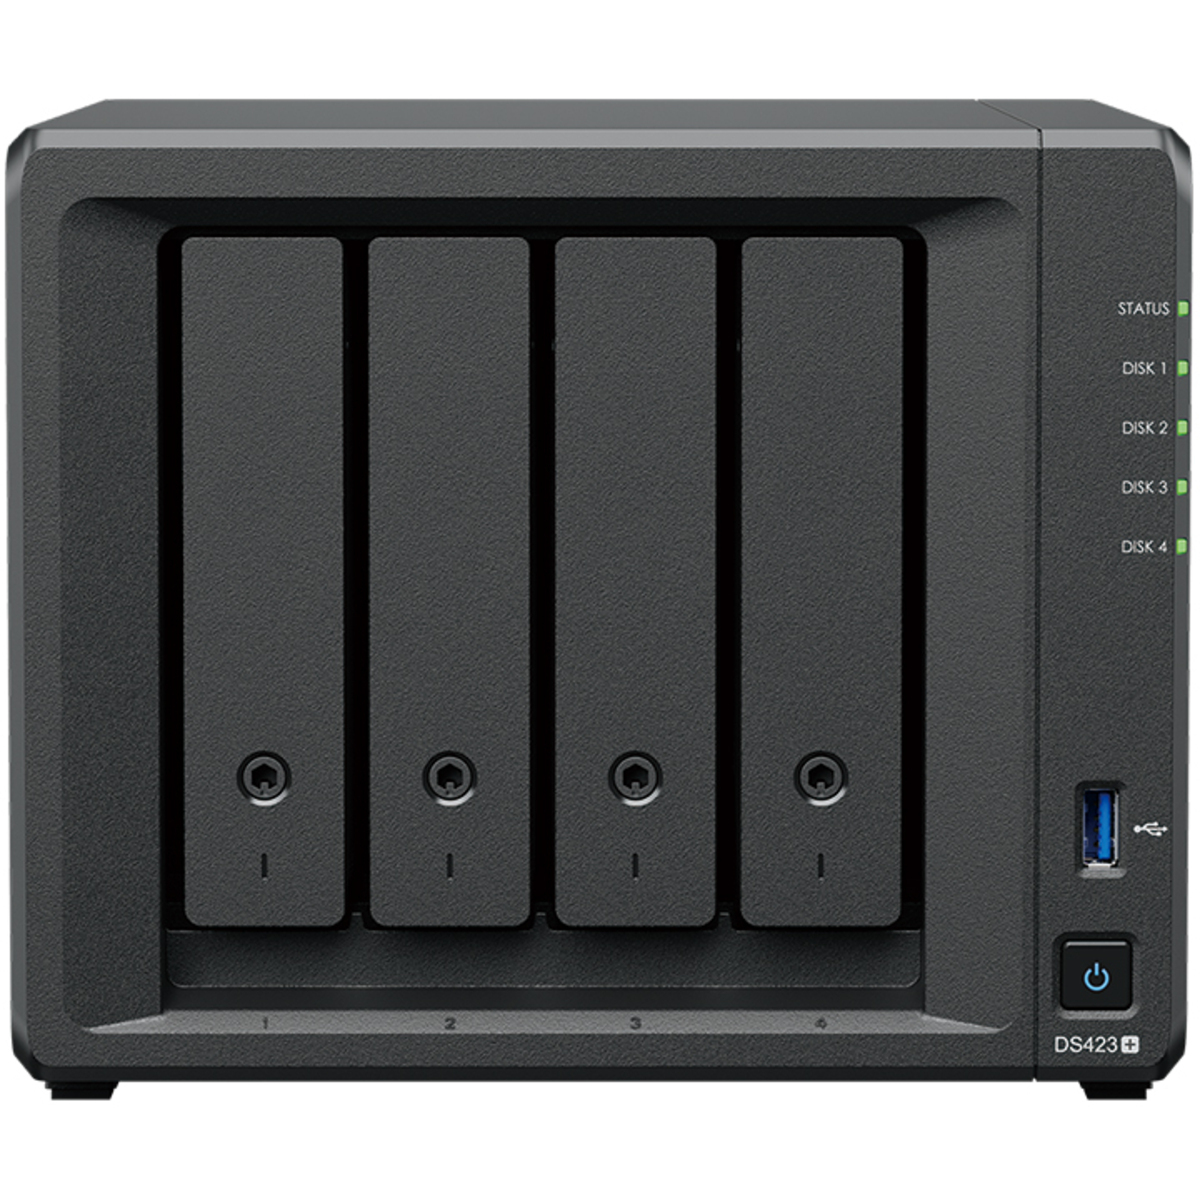 Synology DiskStation DS423+ 6tb 4-Bay Desktop Multimedia / Power User / Business NAS - Network Attached Storage Device 3x2tb Sandisk Ultra 3D SDSSDH3-2T00 2.5 560/520MB/s SATA 6Gb/s SSD CONSUMER Class Drives Installed - Burn-In Tested - FREE RAM UPGRADE DiskStation DS423+